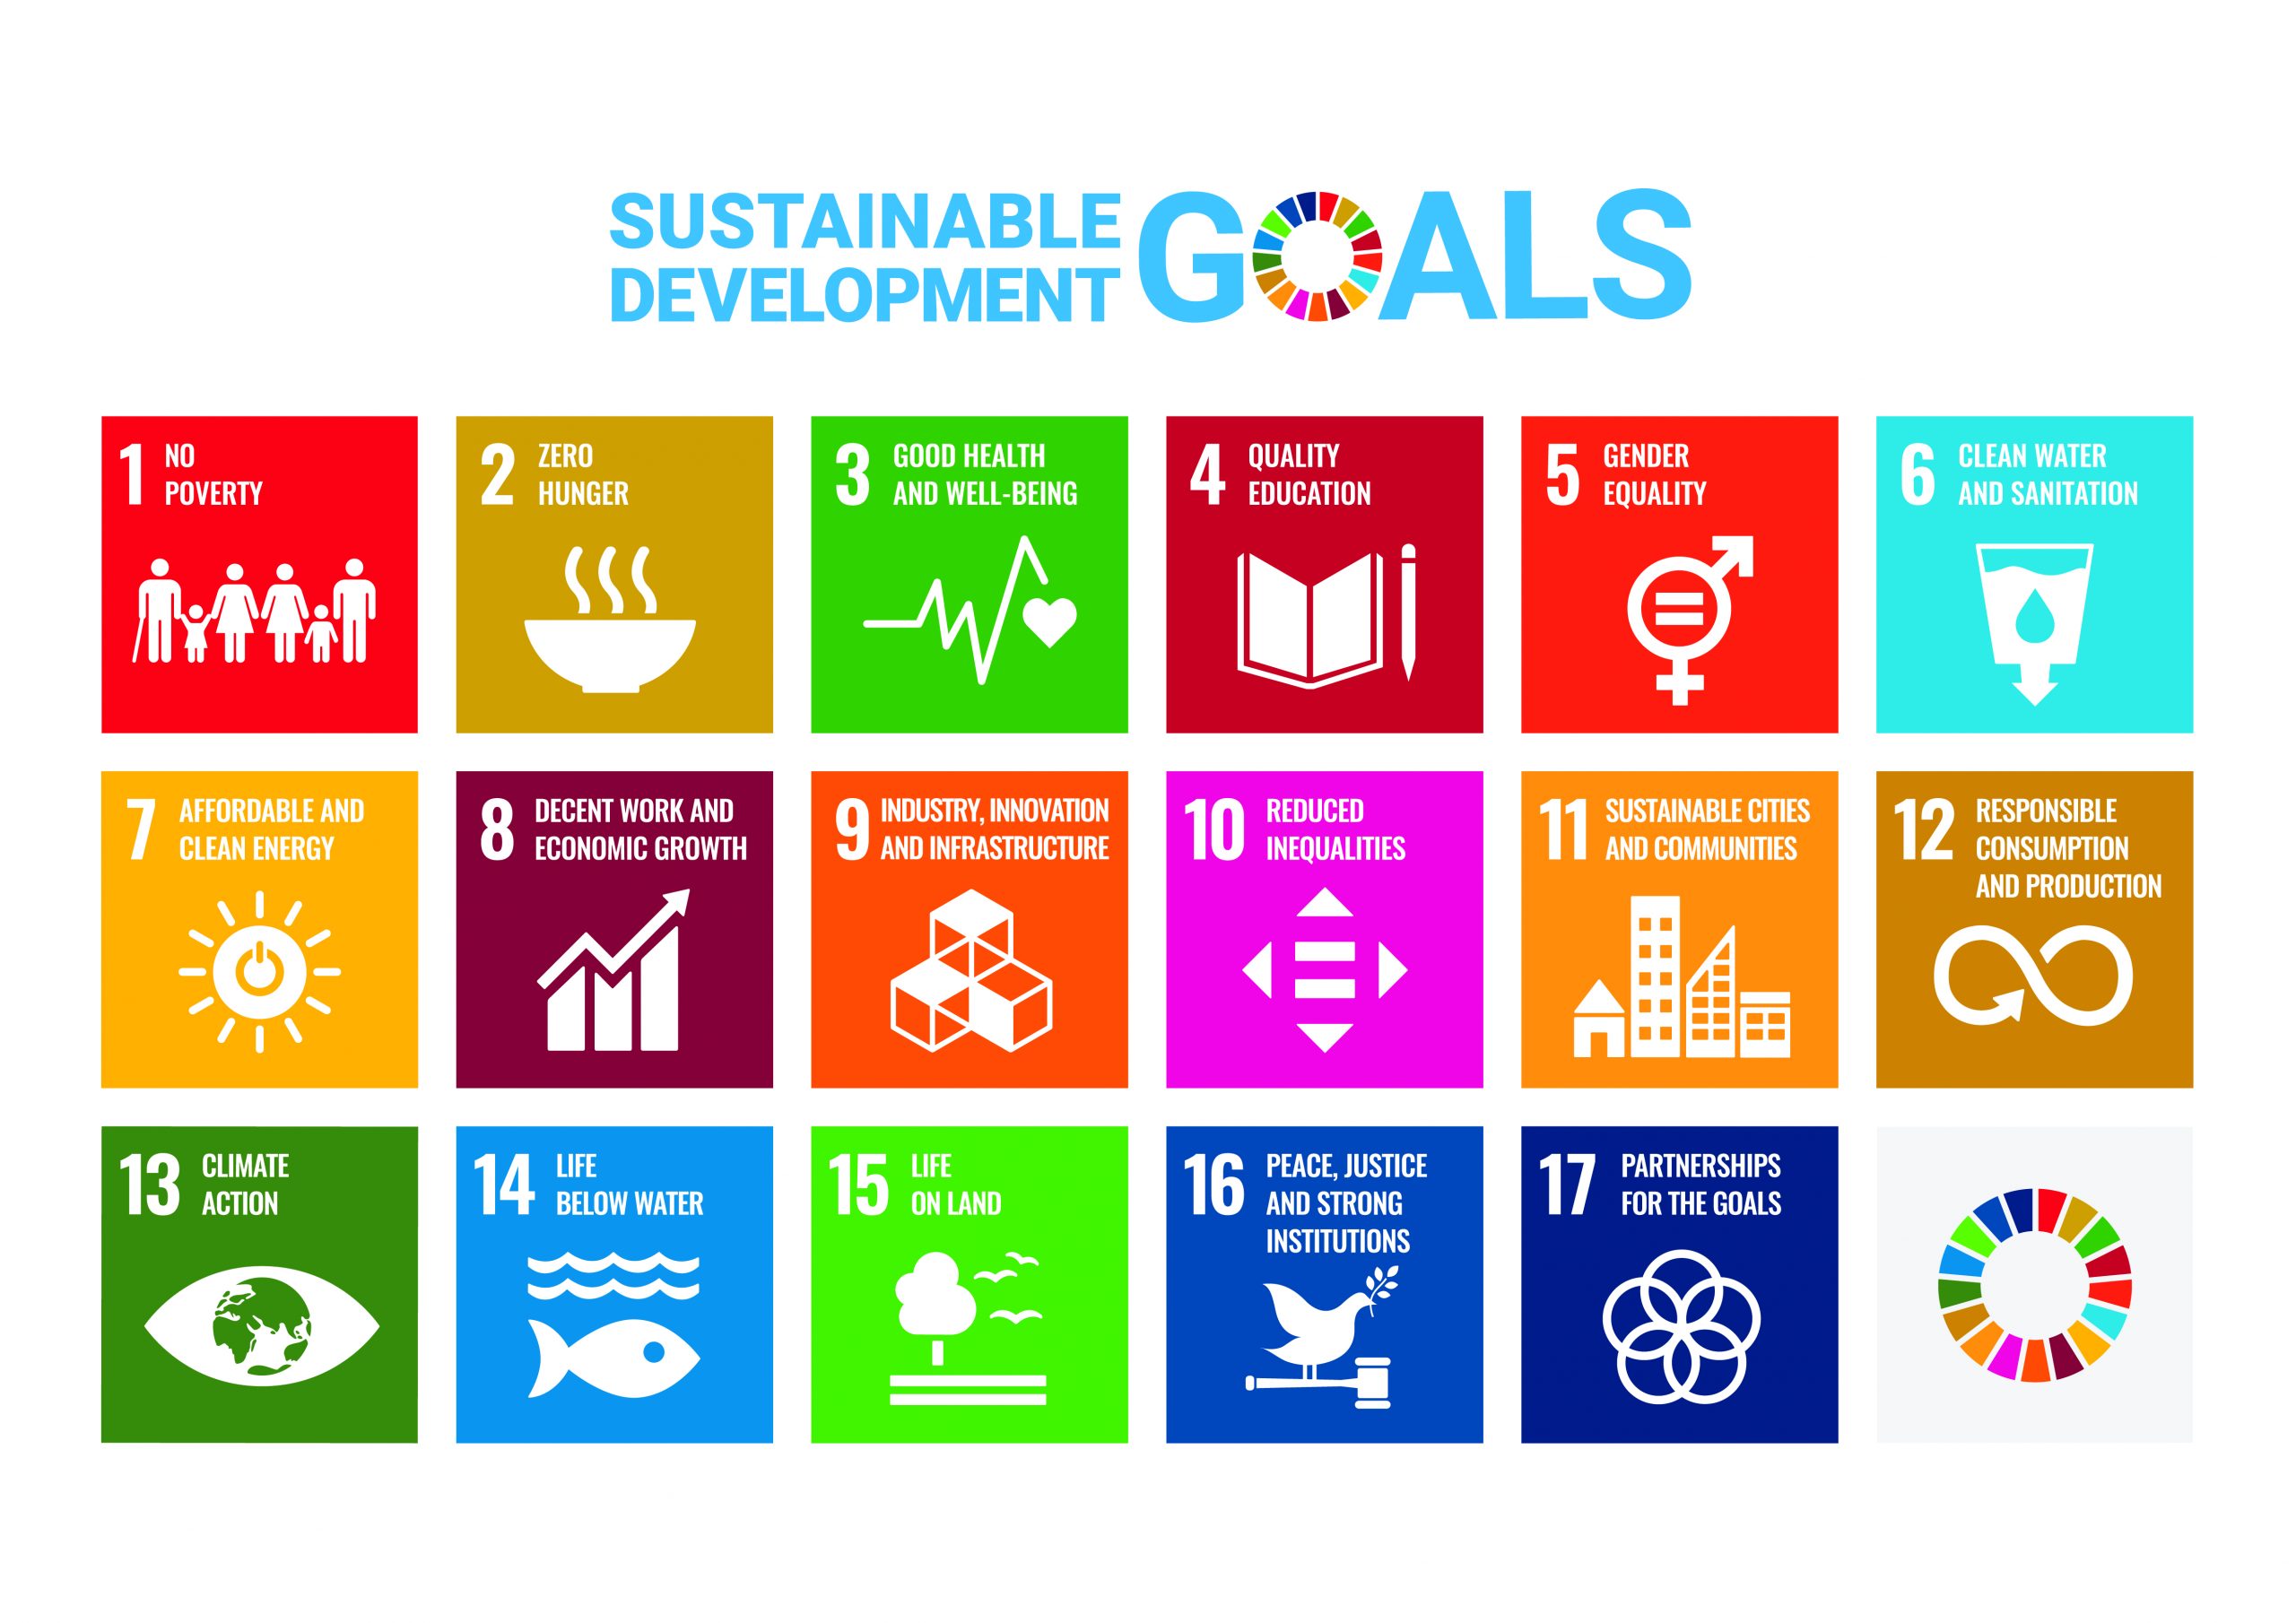 Call on Federal Government to use the SDGs as a framework for economic